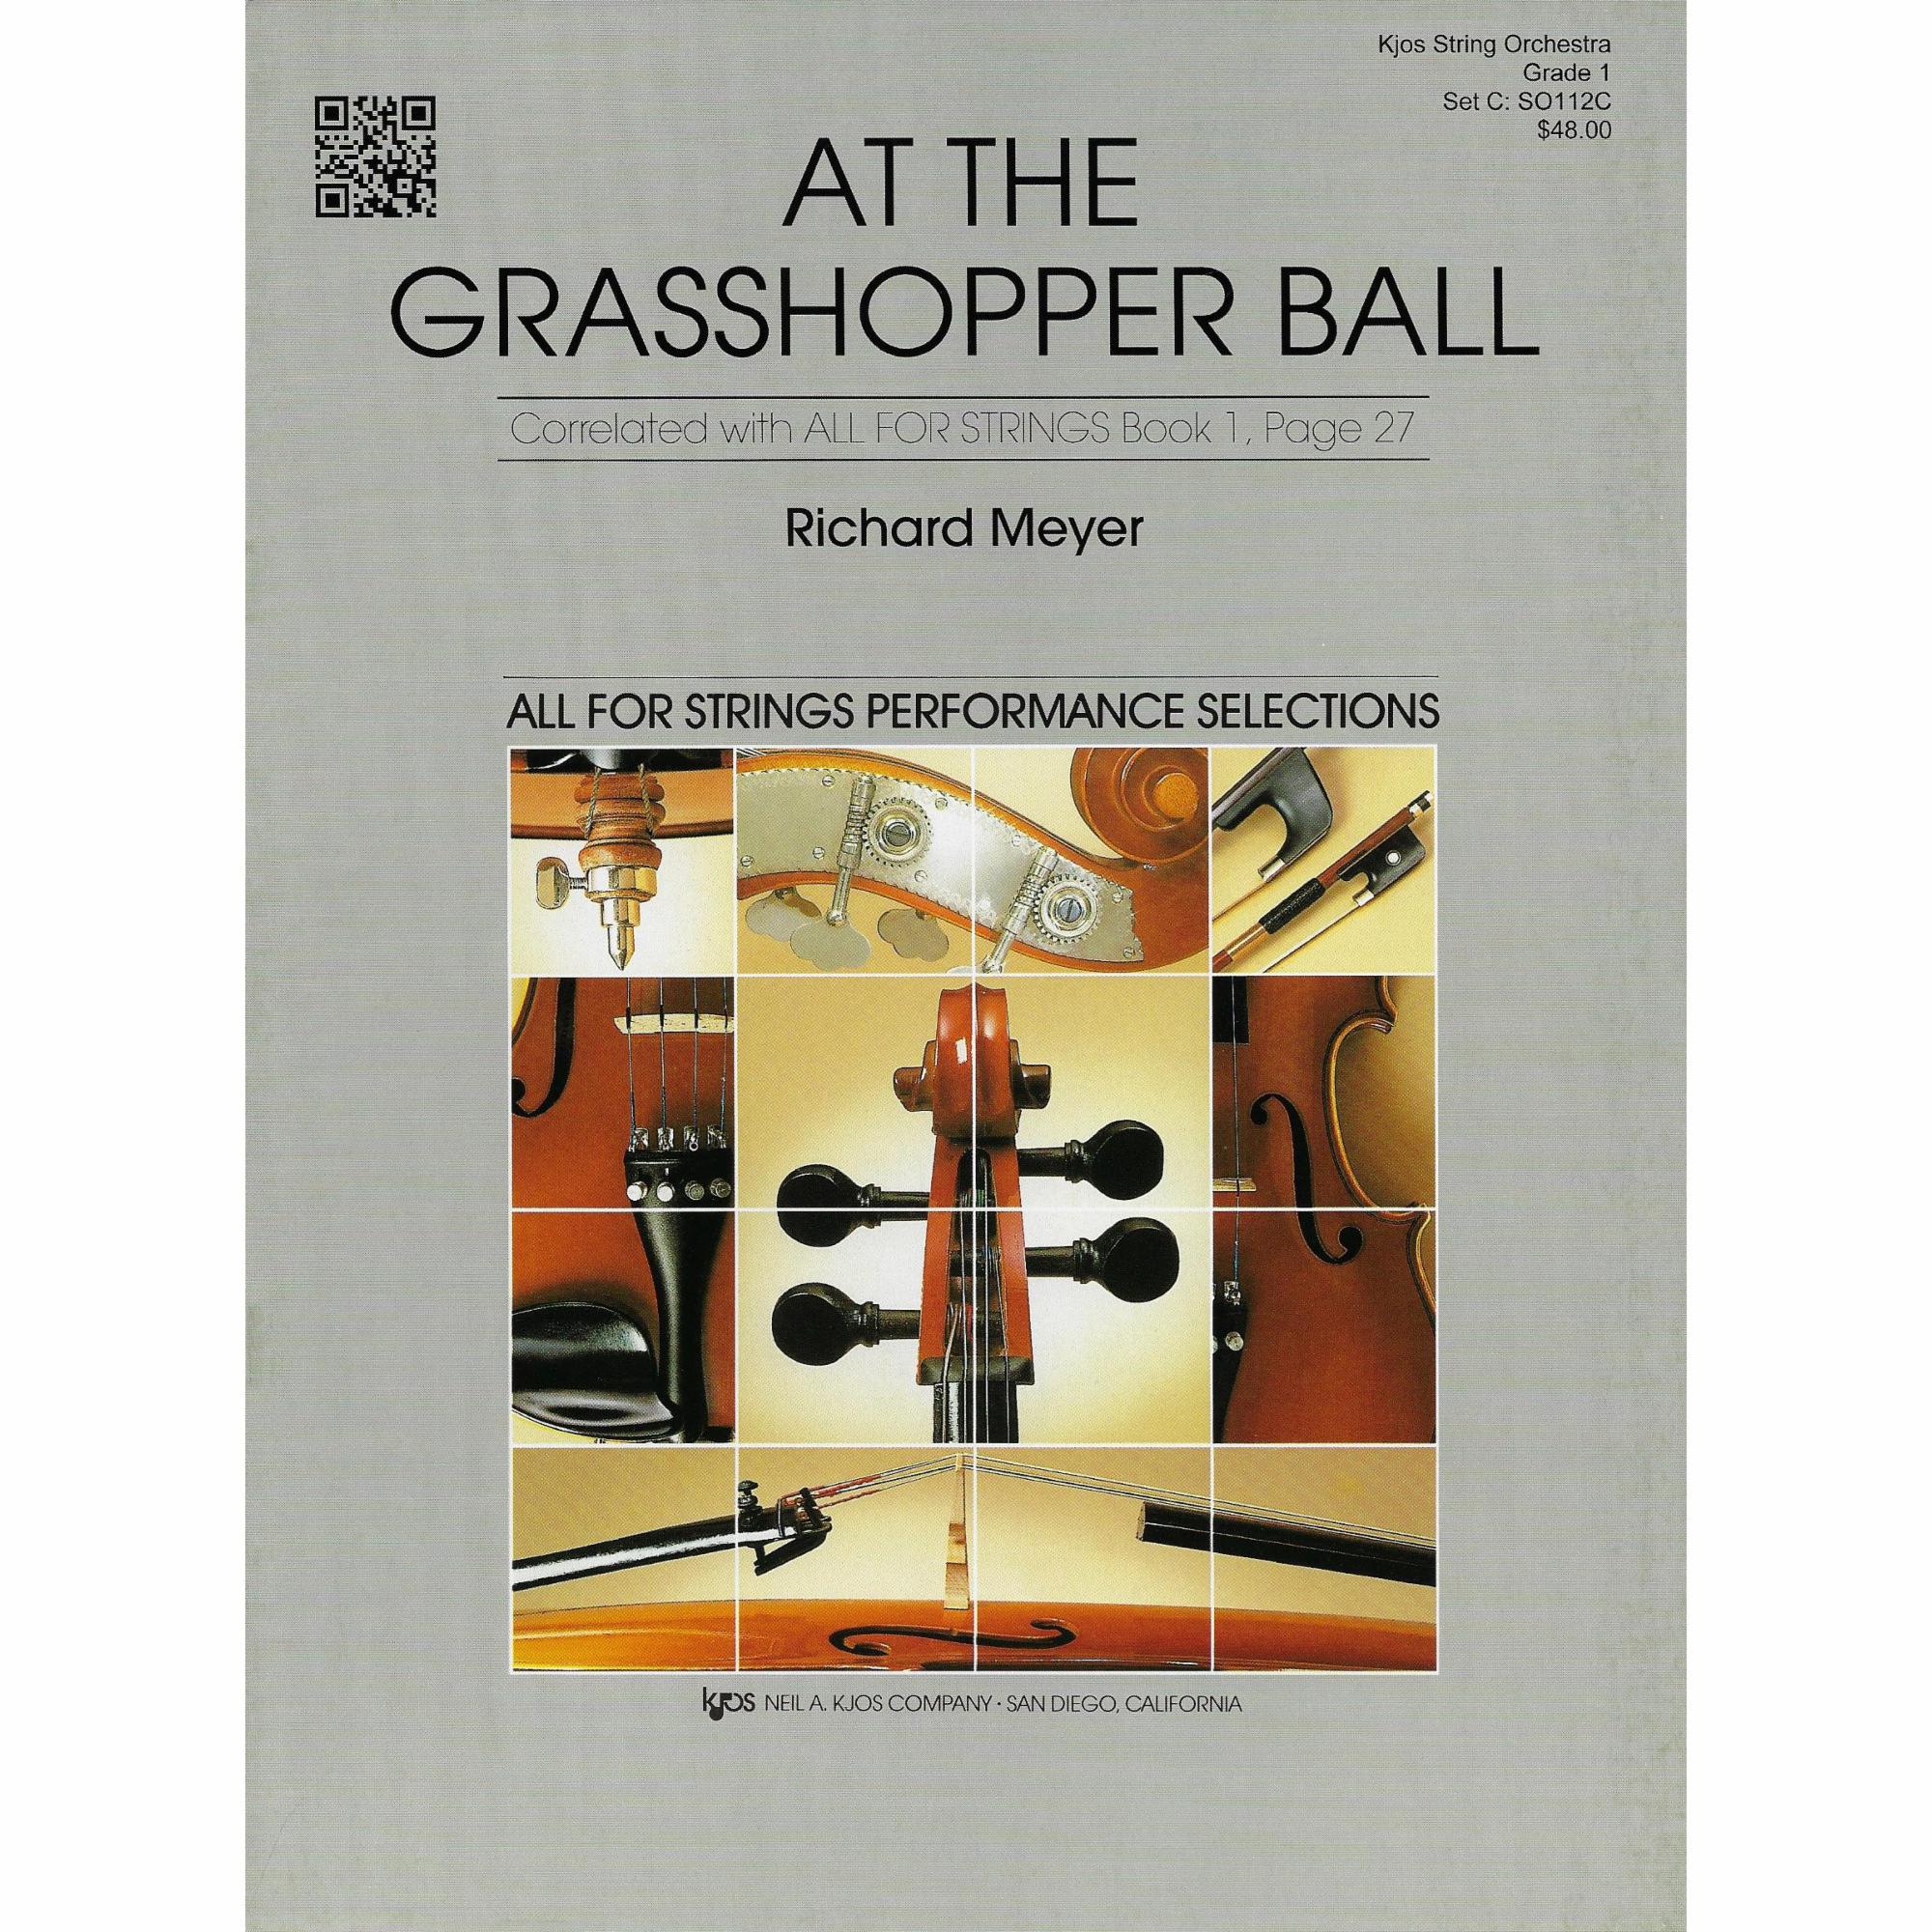 At The Grasshopper Ball for String Orchestra